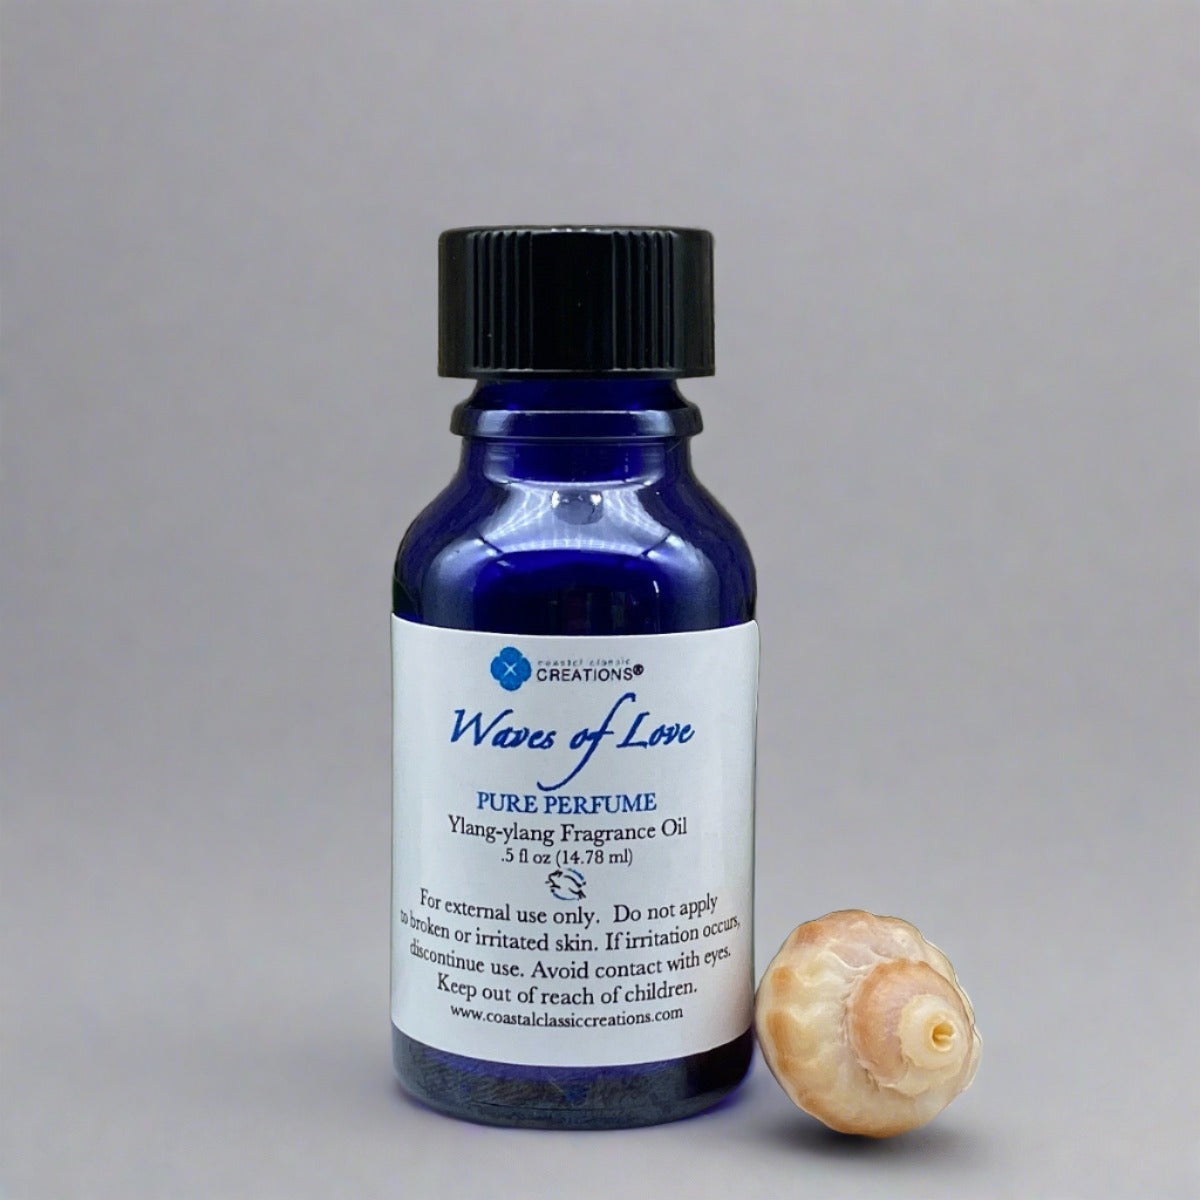 Waves of Love Ylang-Ylang Perfume, a calming and relaxing scent